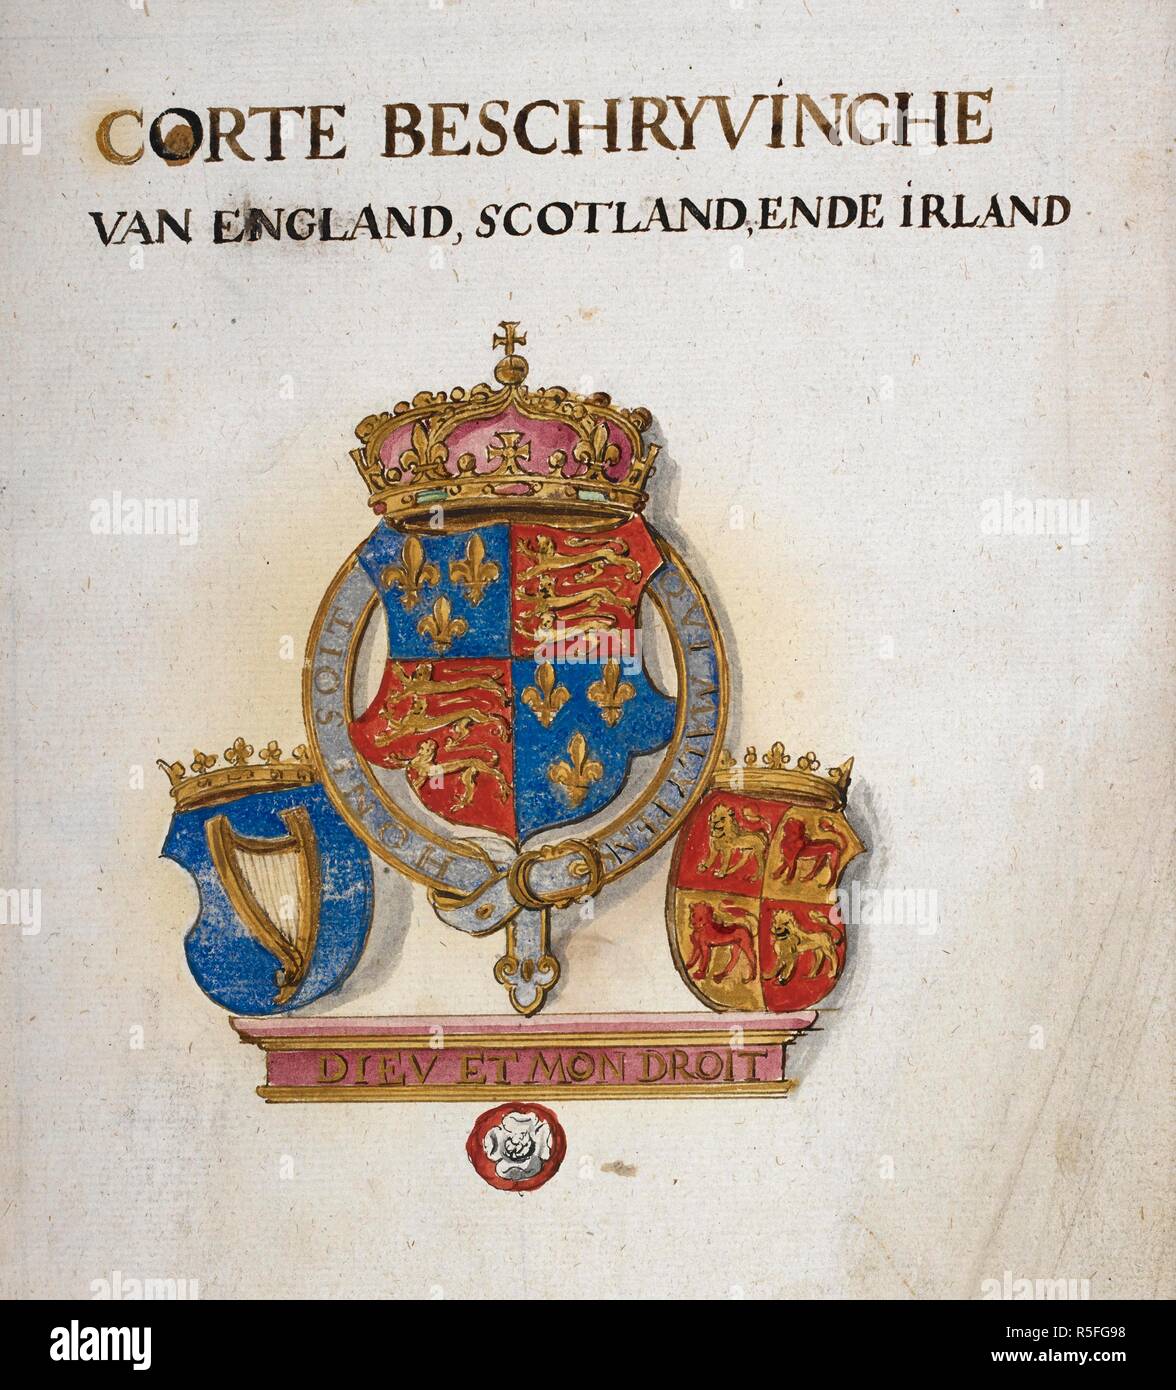 The royal arms of England, Scotland and Ireland at the time of Elizabeth I.  Corte Beschryvinghe van Engheland, Schotland, ende Irland, a short  description of England, Scotland and Ireland. England, London, 1573-1575.